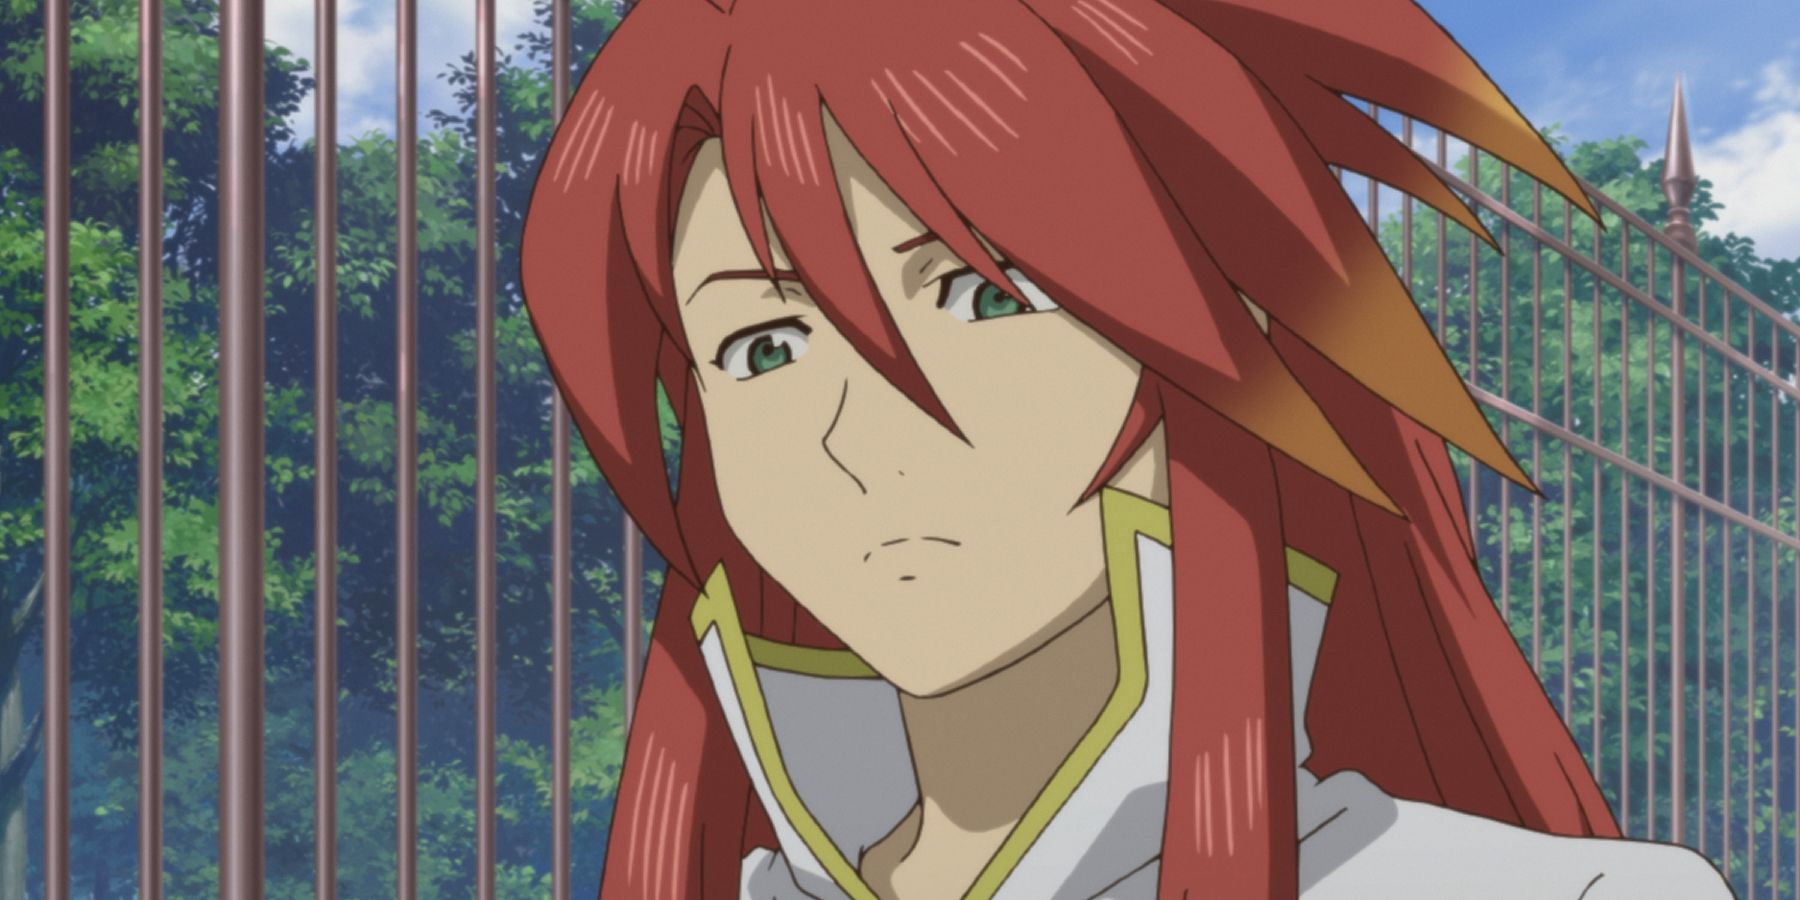 Tales of the Abyss anime